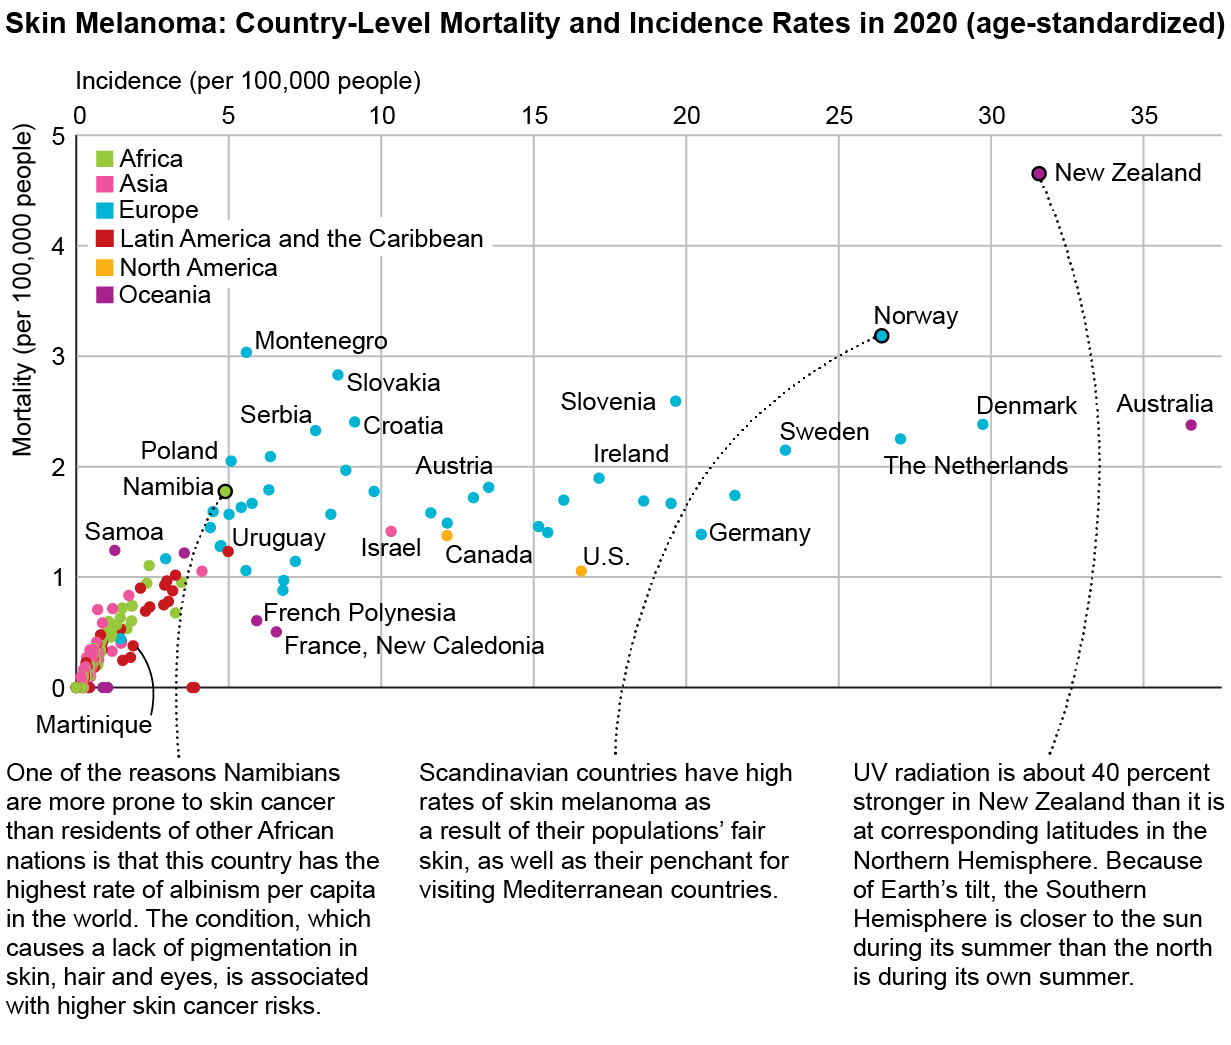 Chart shows age-standardized mortality and incidence rates of skin melanoma by country in 2020.